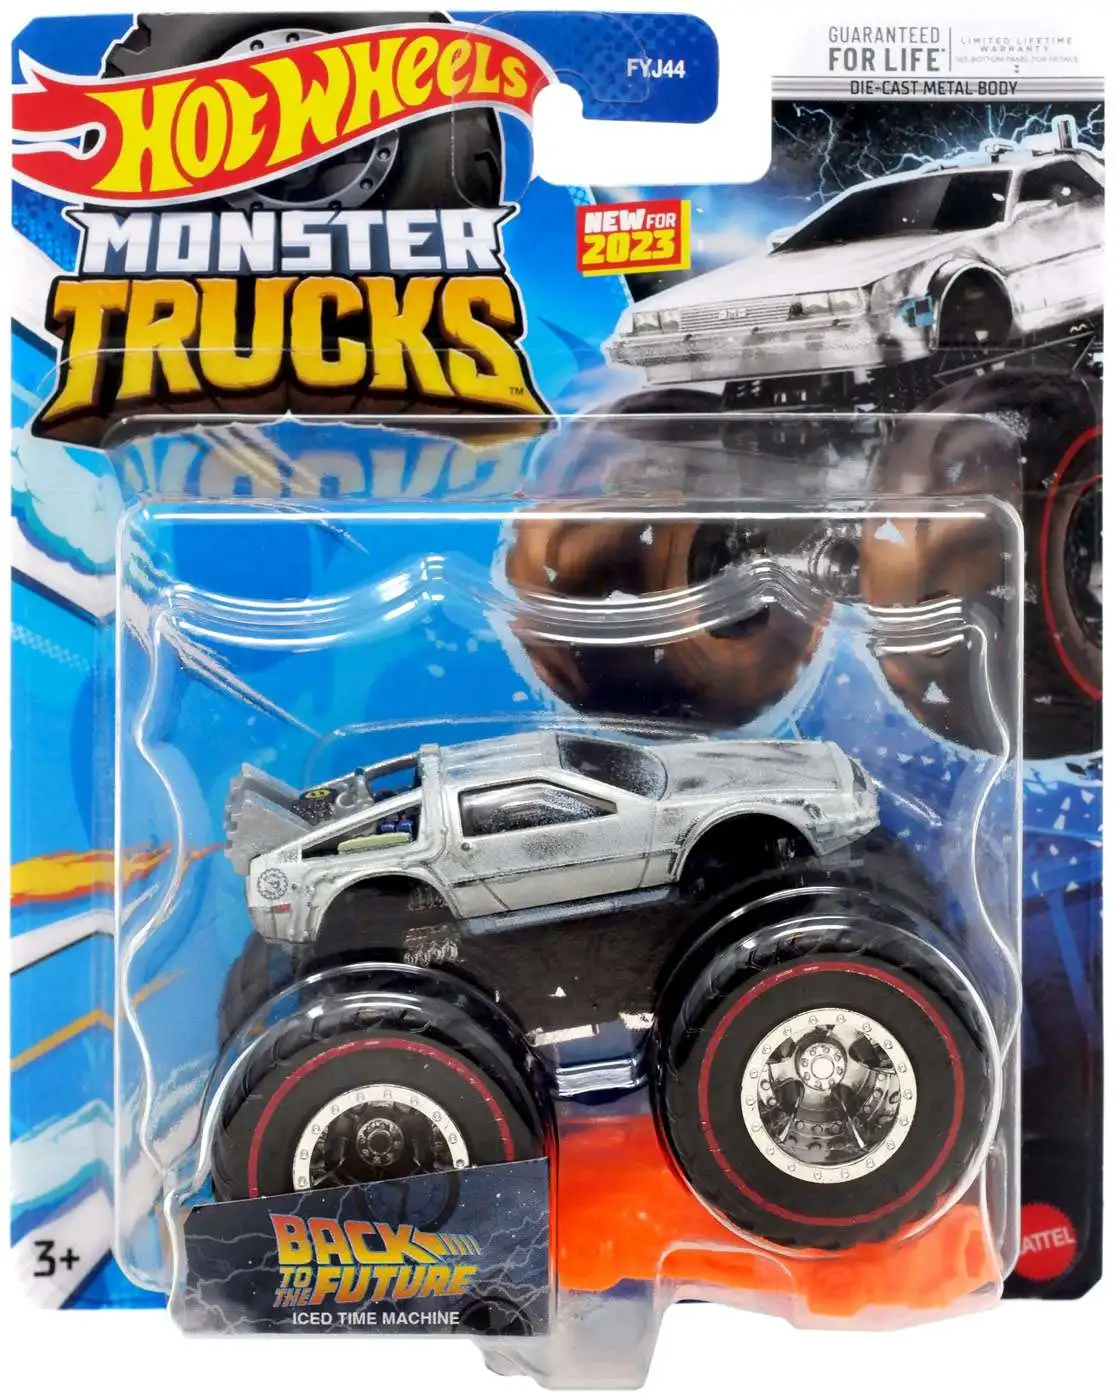 WORLDS SMALLEST HOT WHEELS MONSTER TRUCK - THE TOY STORE